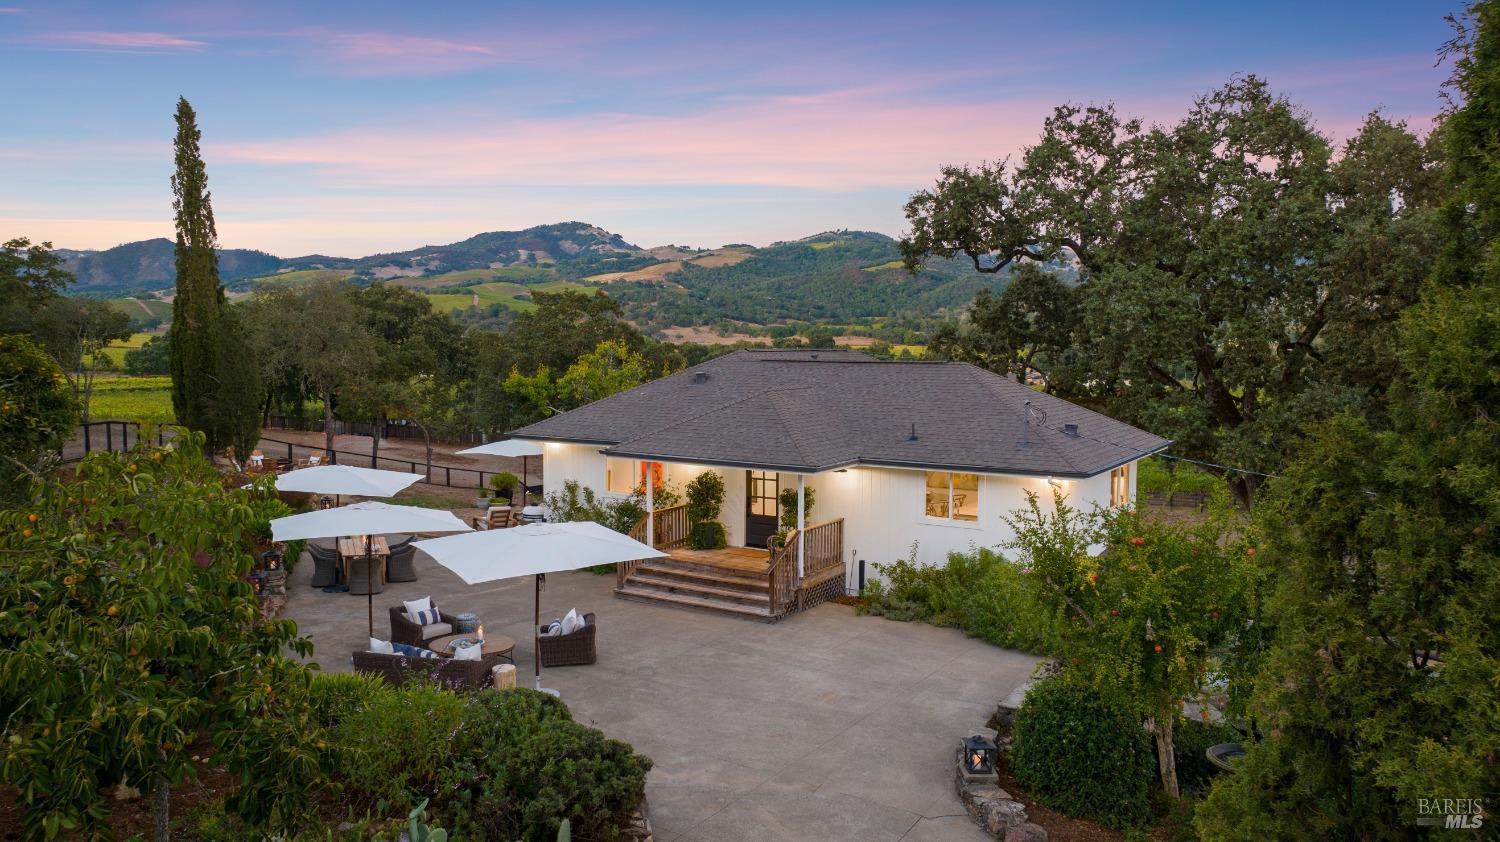 Two homes enjoy breathtaking views from the valley floor. 17+- acres in the center of Sonoma Valley just outside the town of Glen Ellen.